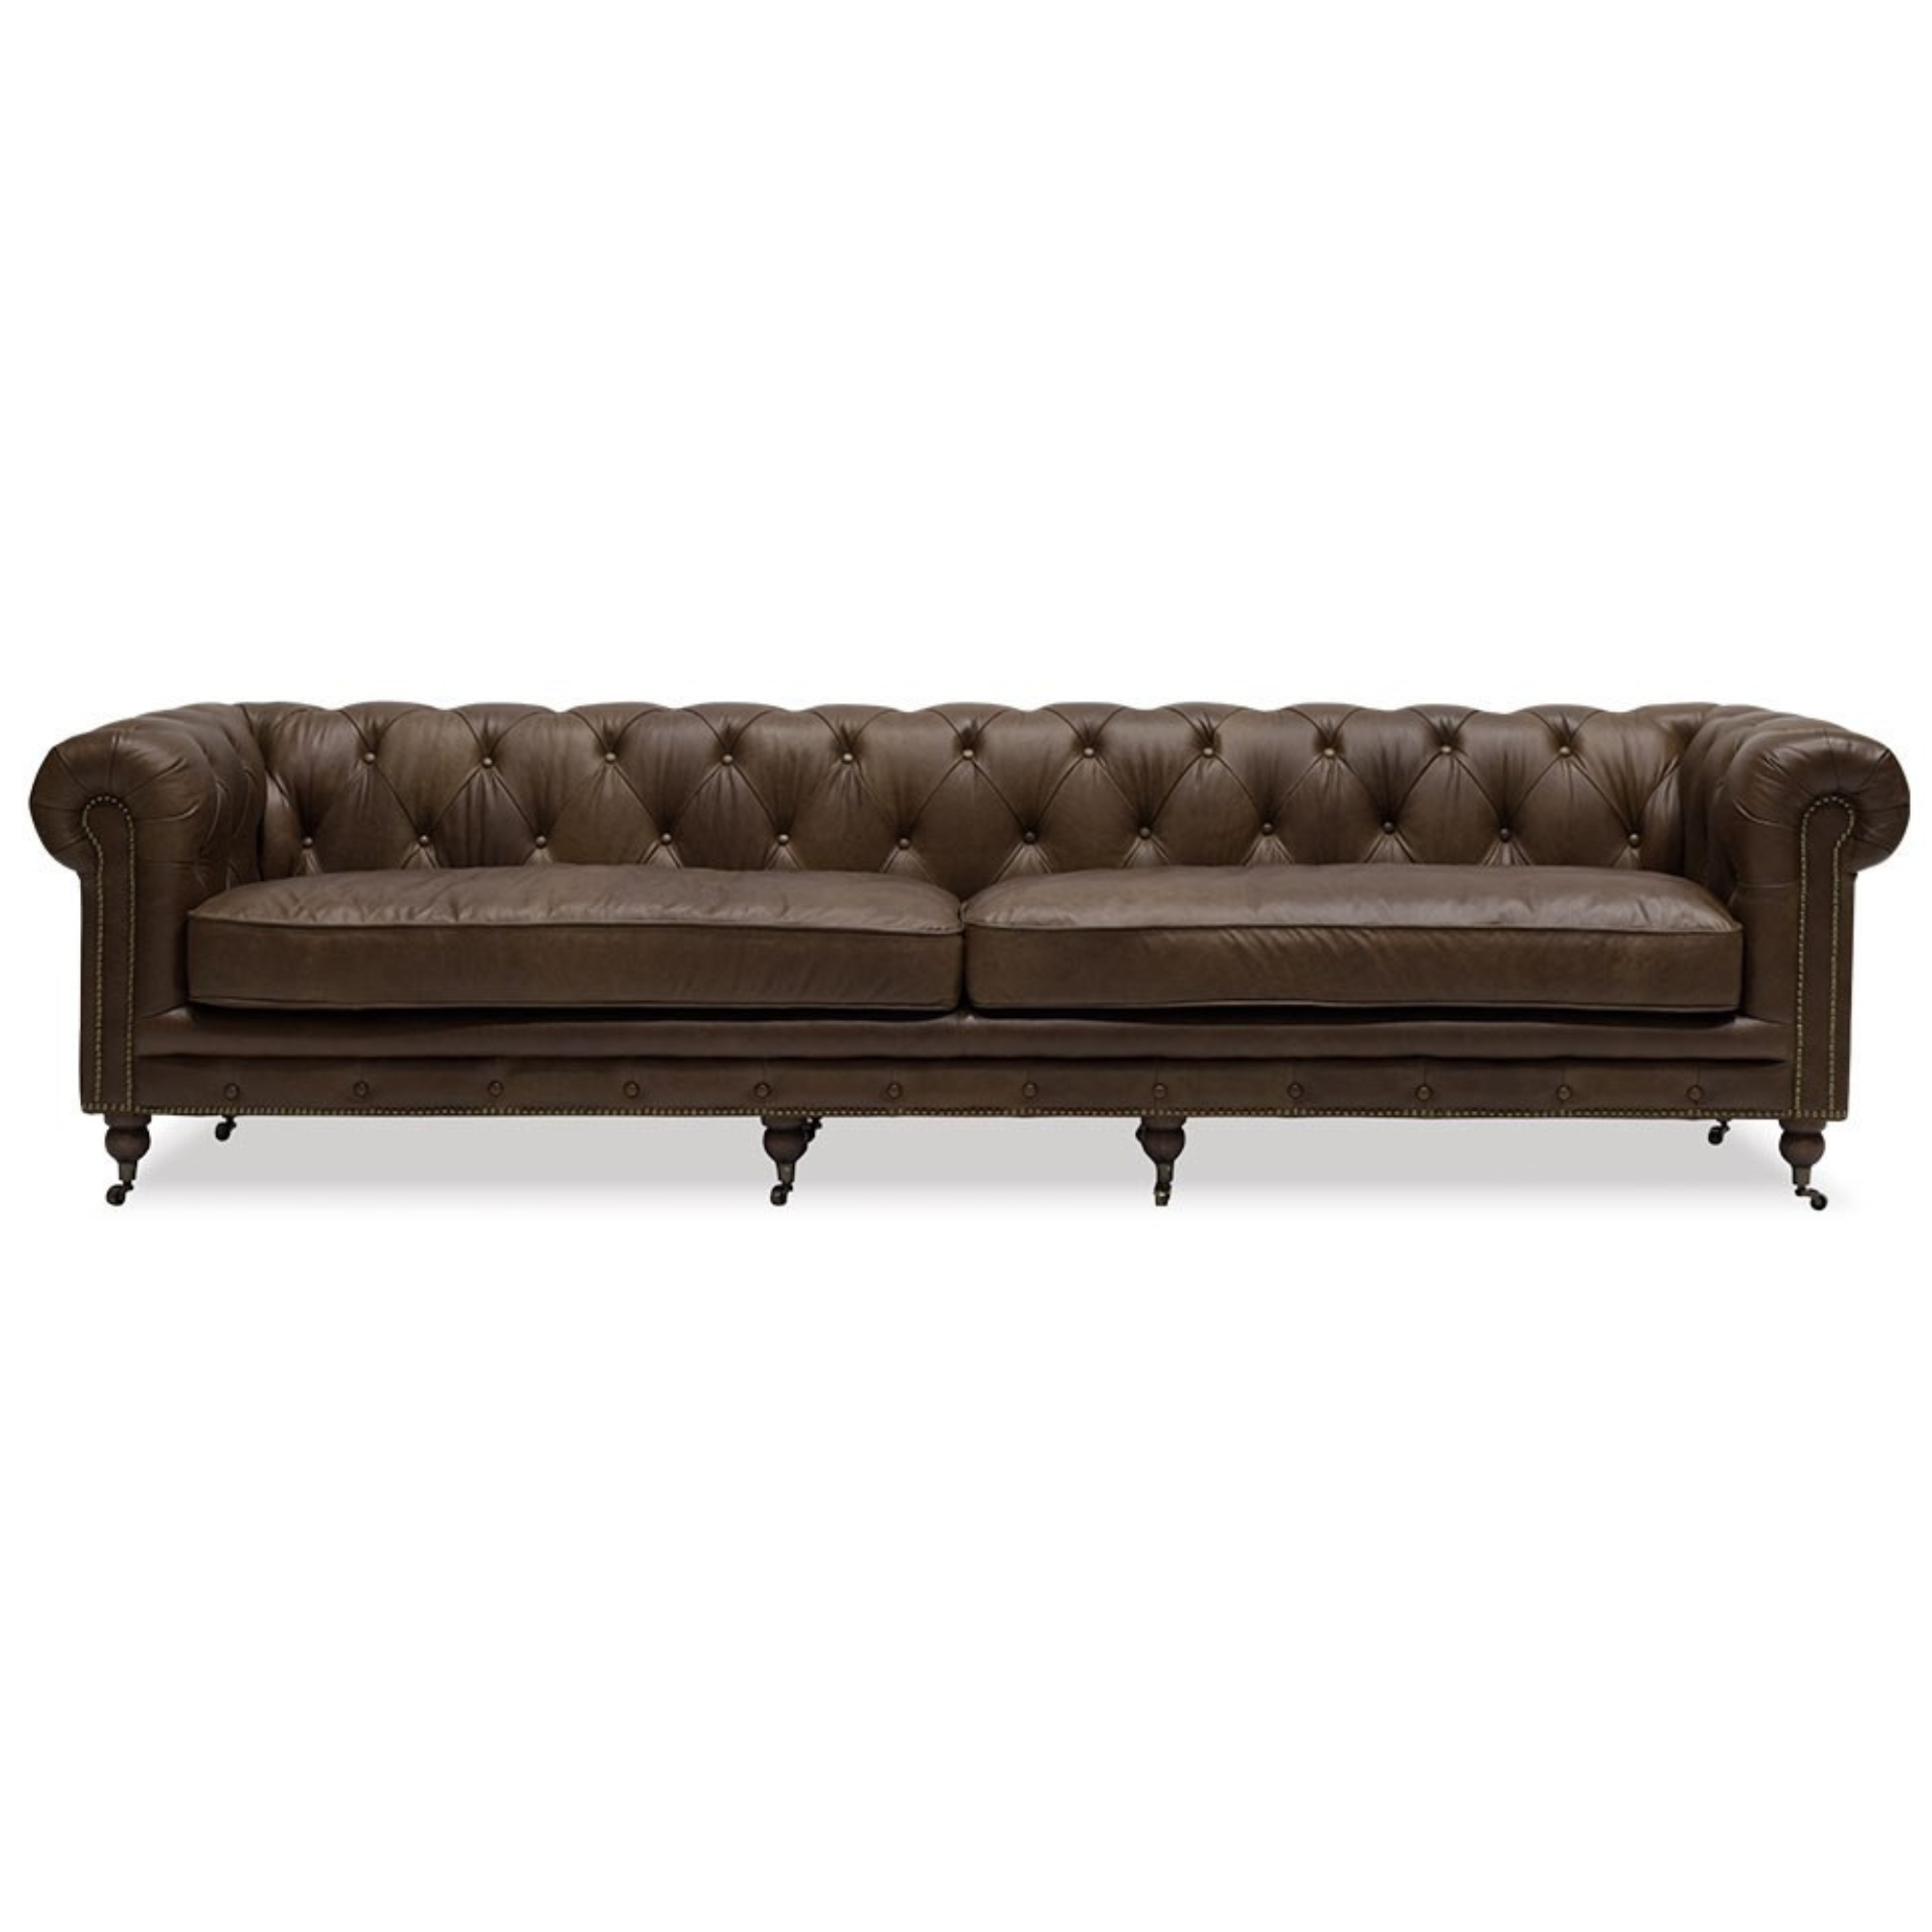 STANHOPE LEATHER 4 SEATER CHESTERFIELD